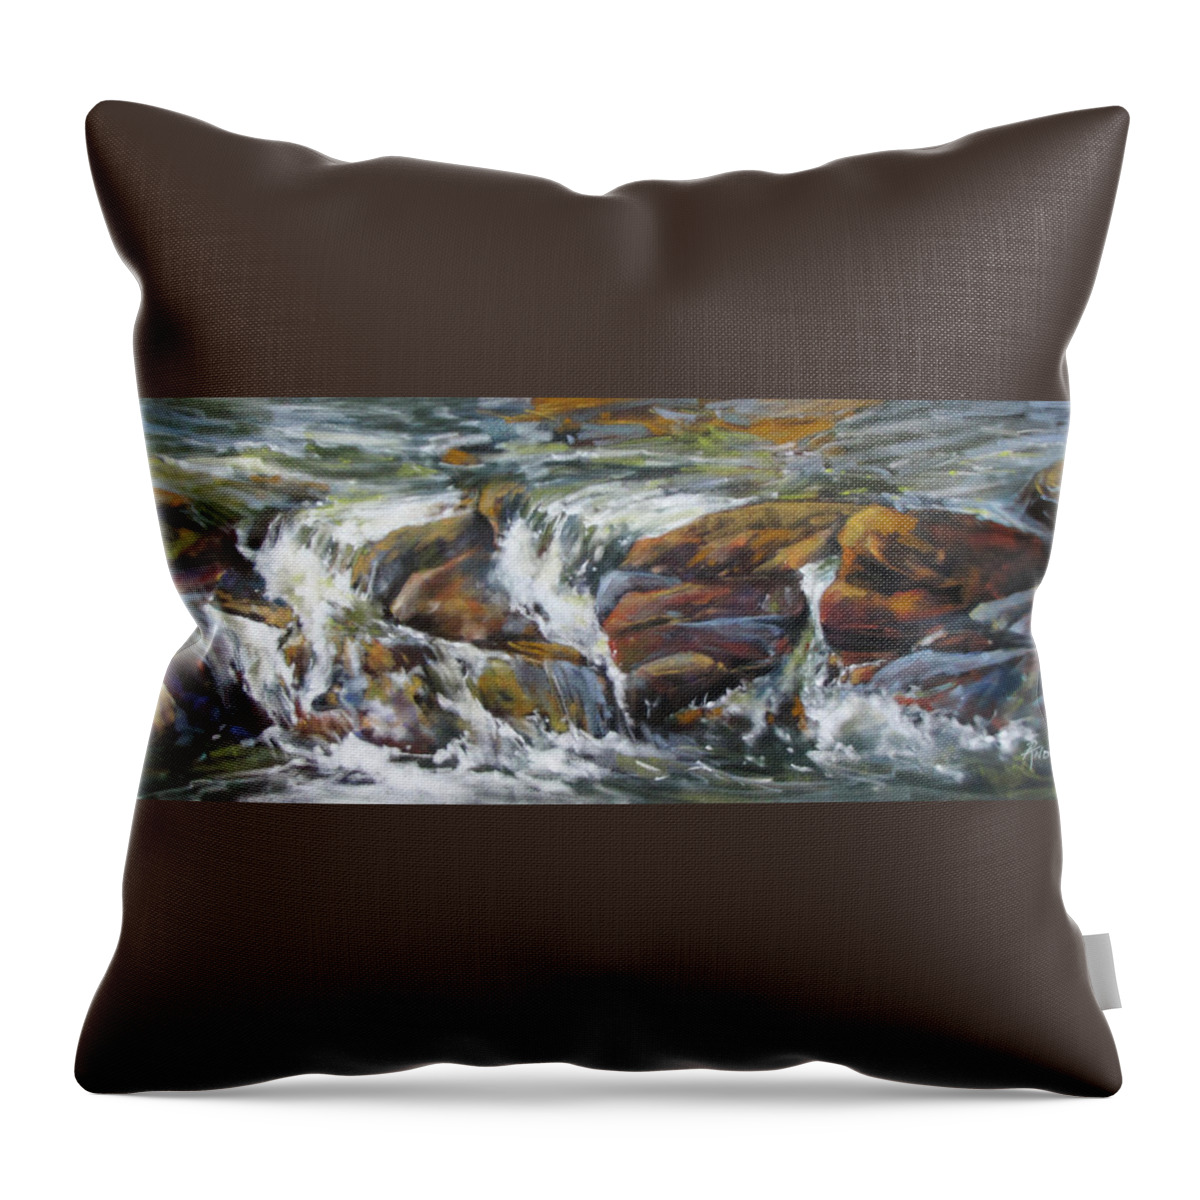 Creek Throw Pillow featuring the painting Bull Creek Escape by Rae Andrews